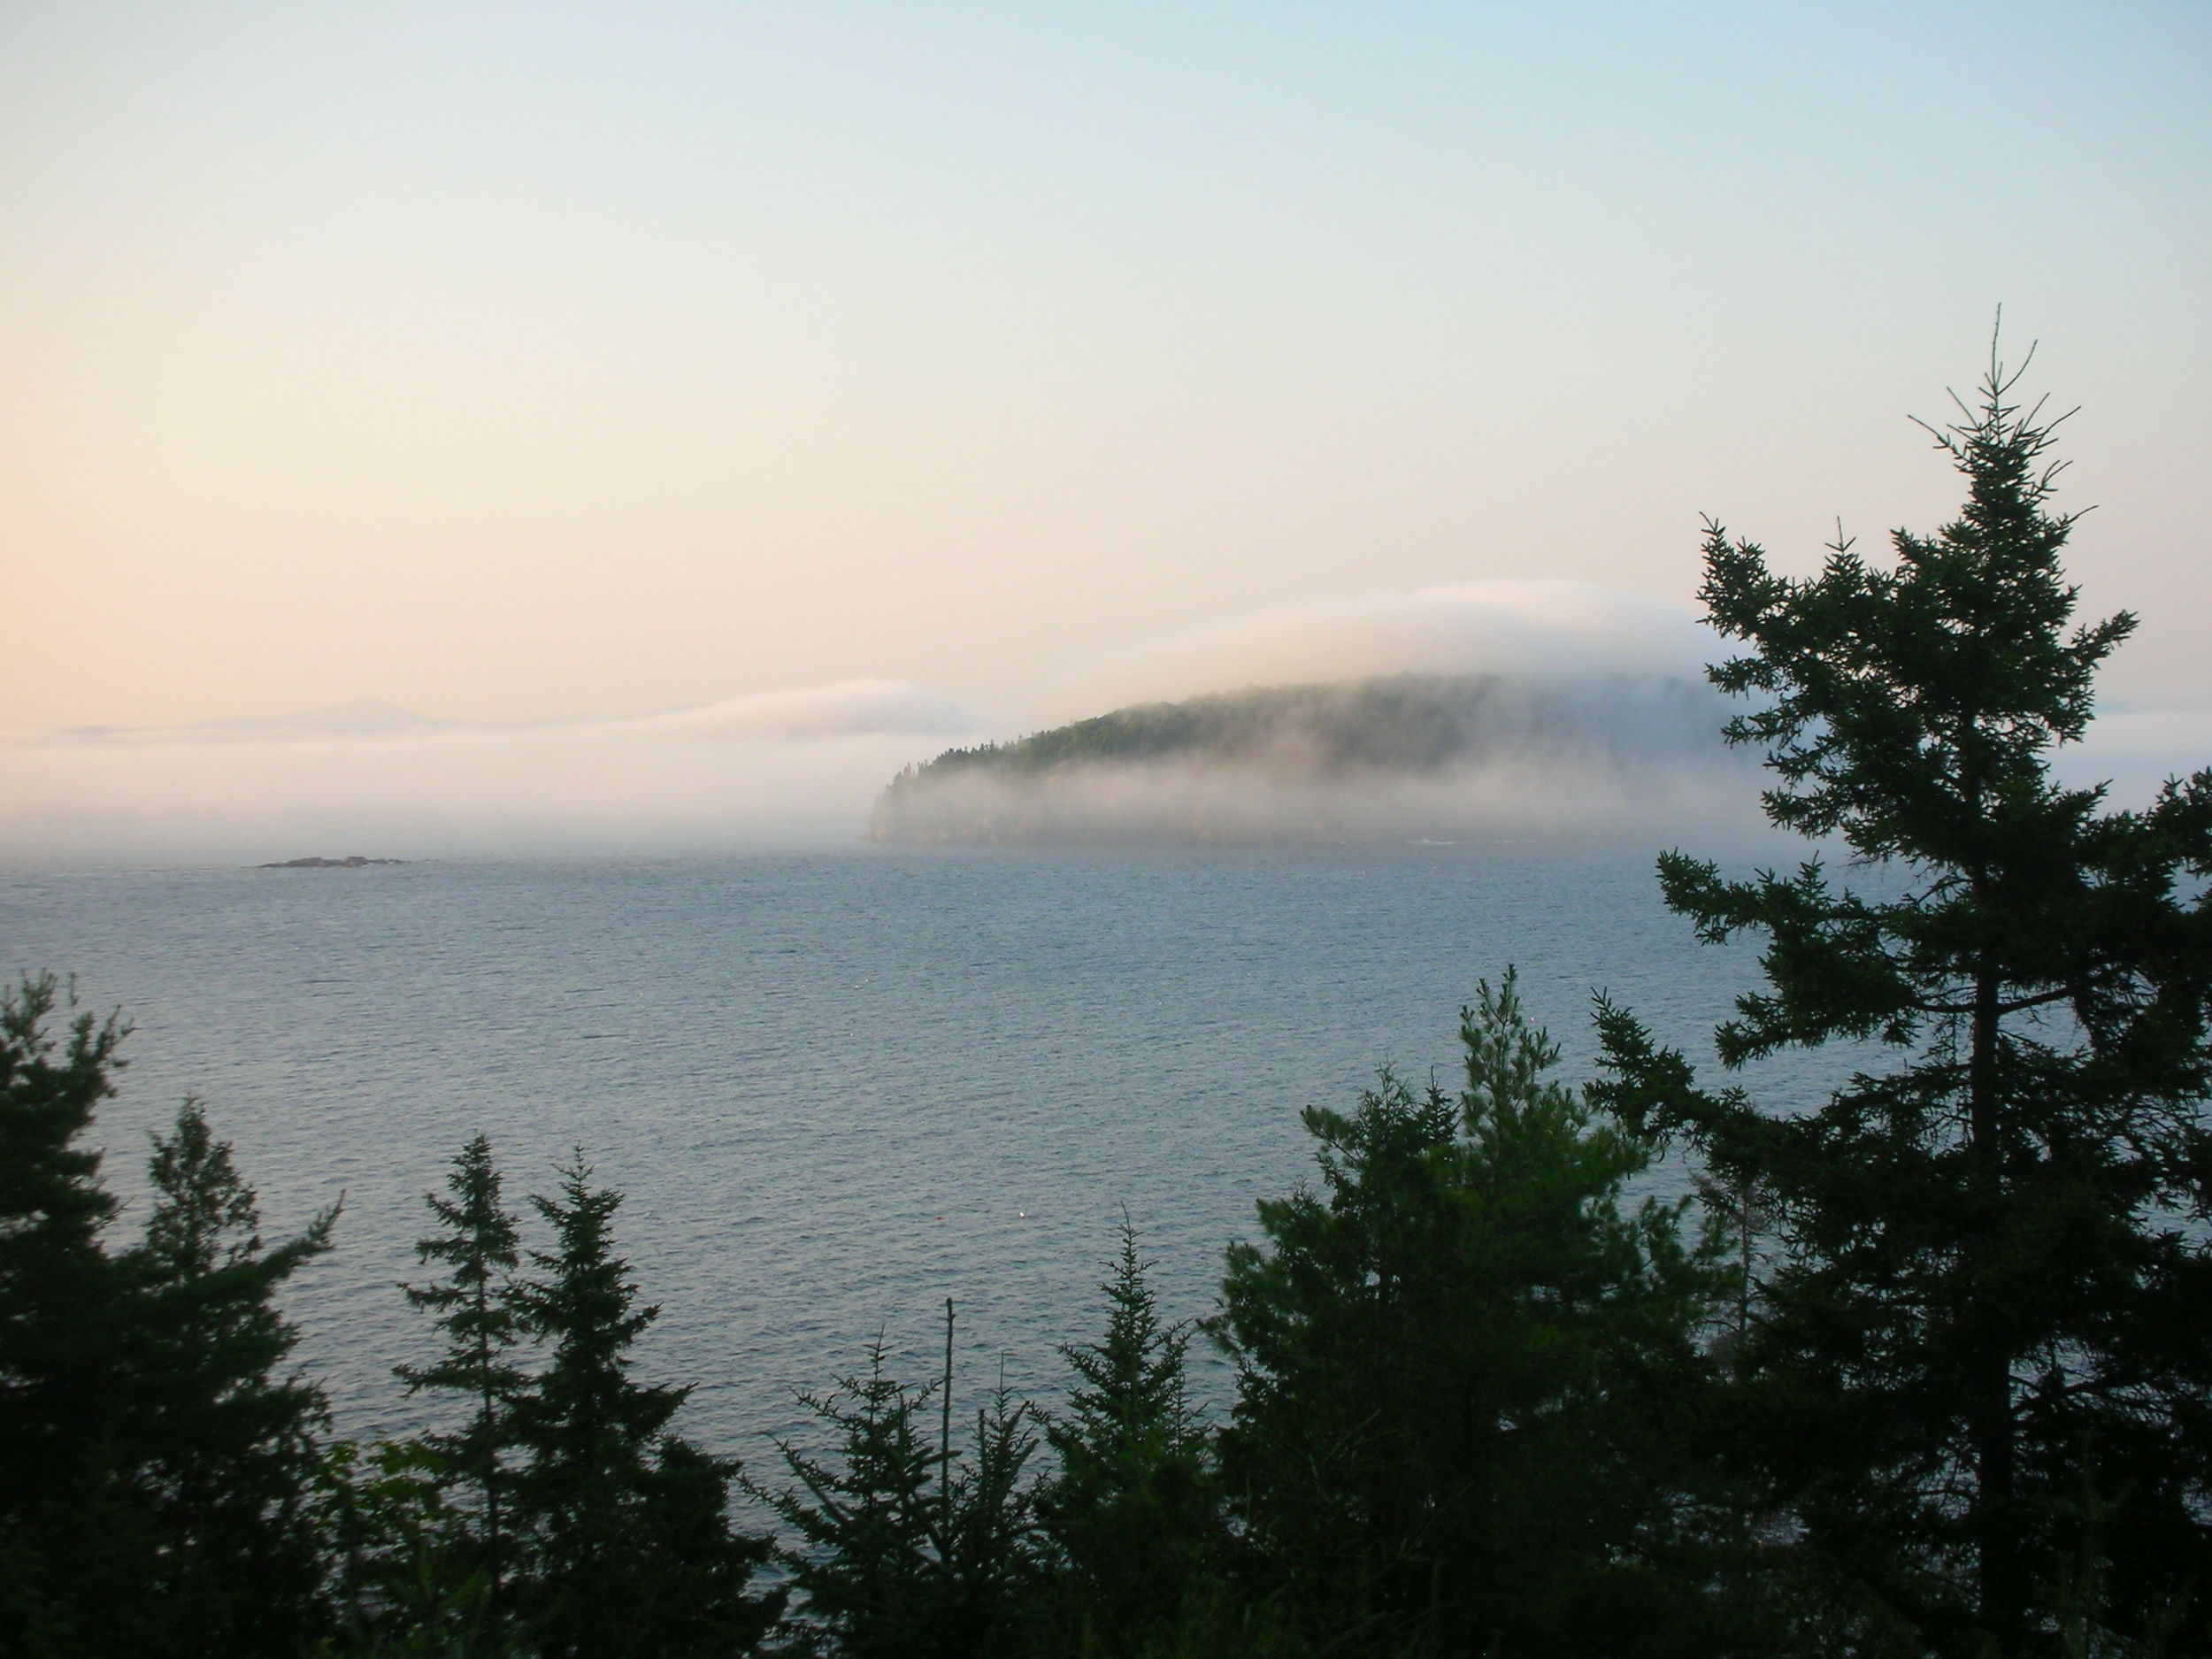  The fog's artistic brush stroke over the Porcupine Islands from the porch. 